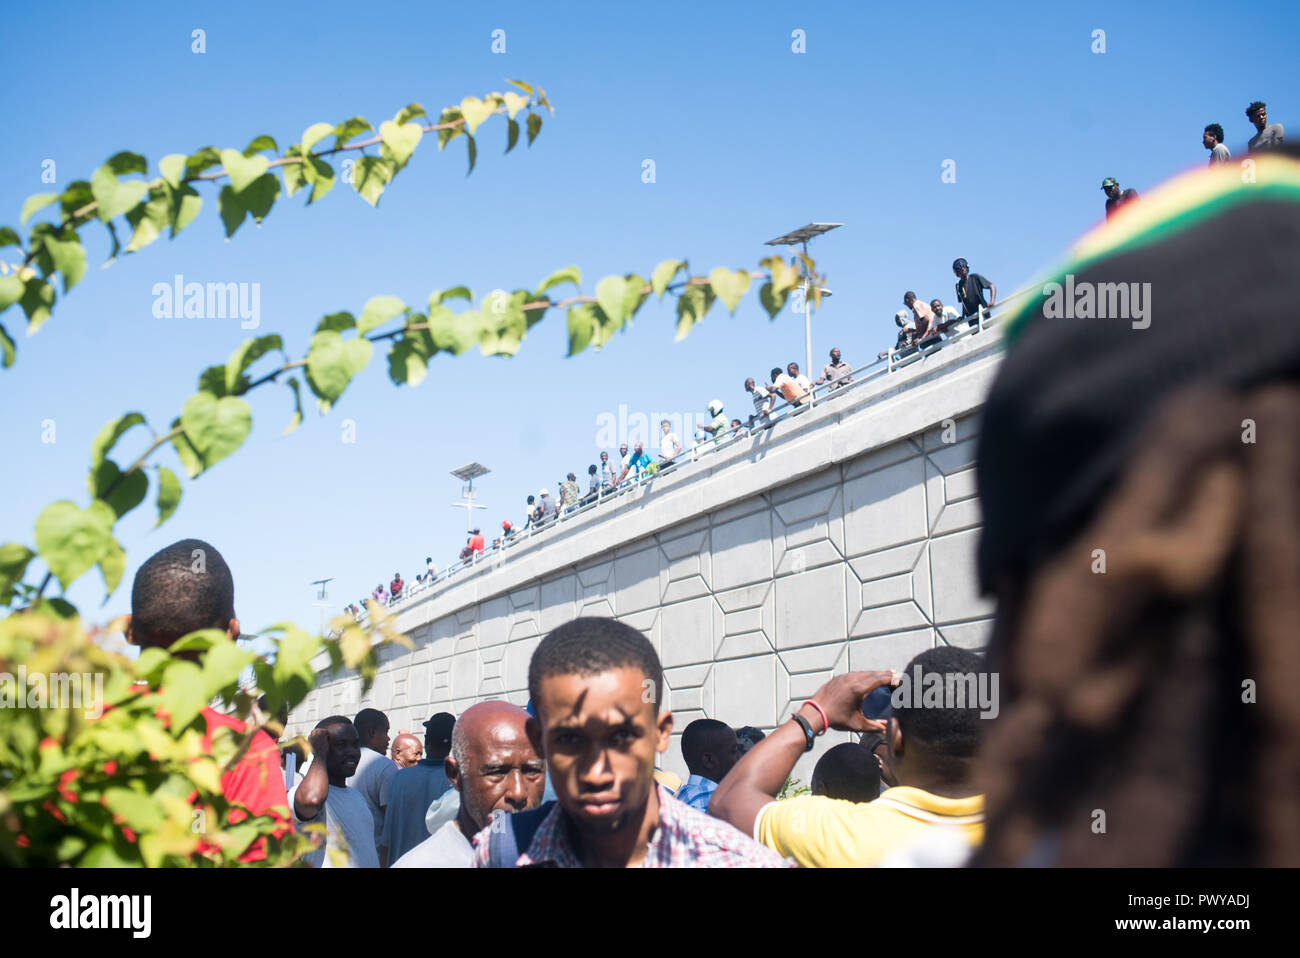 October 17, 2018 - Port-Au-Prince, Ouest, Haiti - Protesters gathered to demonstrate against the $3.8 billion that the government and private firms have been accused of embezzling from Venezuela's subsidized PetroCaribe oil program. The revenue was supposed to go toward financing economic and social programs. The PetroCaribe Challenge was started after Haitian filmmaker Gilbert Mirambeau Jr. posted on social media asking: 'Kot KÃ²b PetroCaribe a,'' or 'Where did the PetroCaribe money go?'' With a large youth, grassroots base nationwide demonstrations across Haiti are asking for account Stock Photo